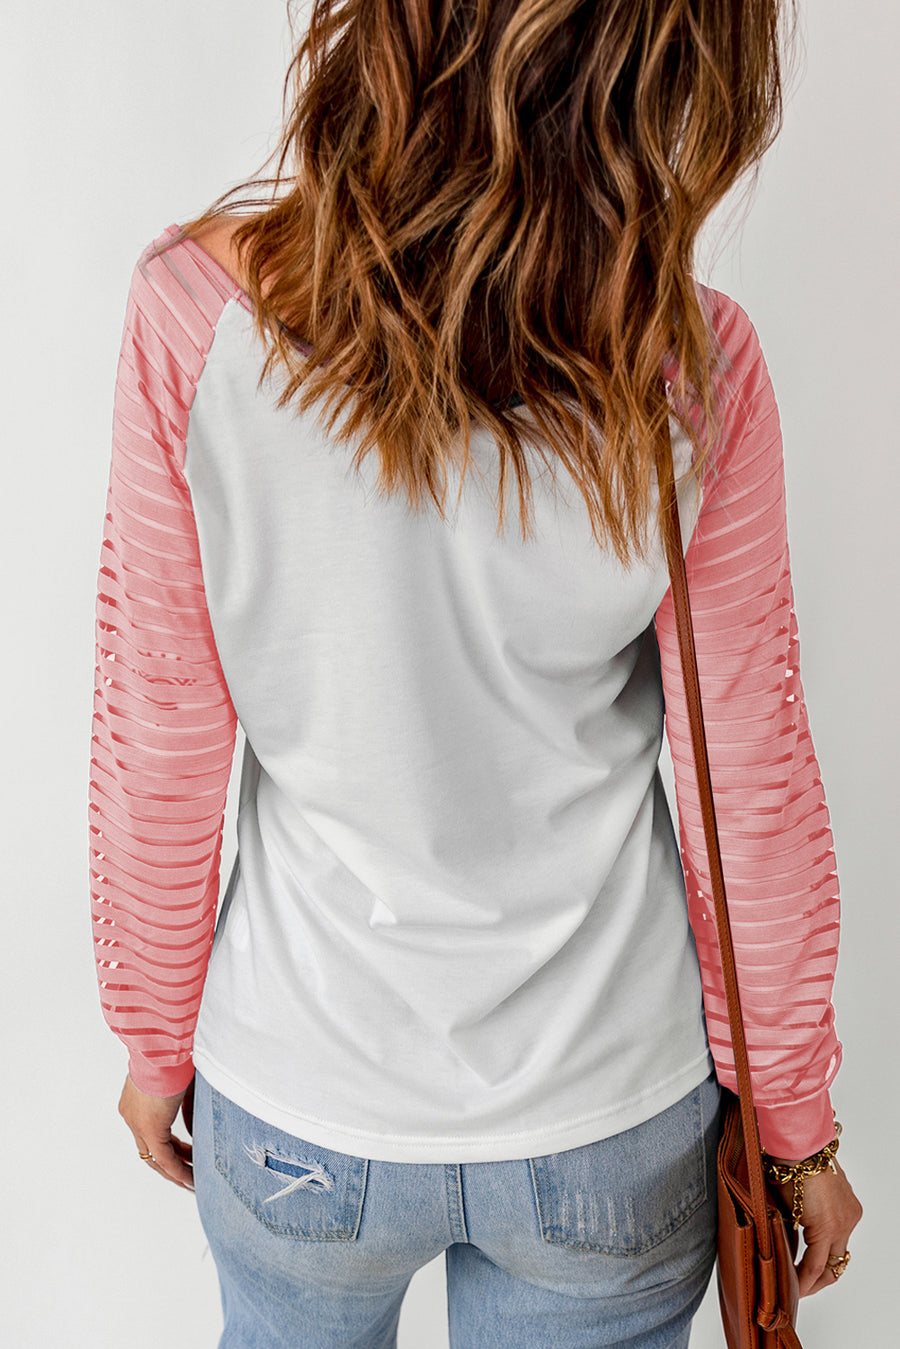 Looking Glass Sheer Striped V-Neck Top